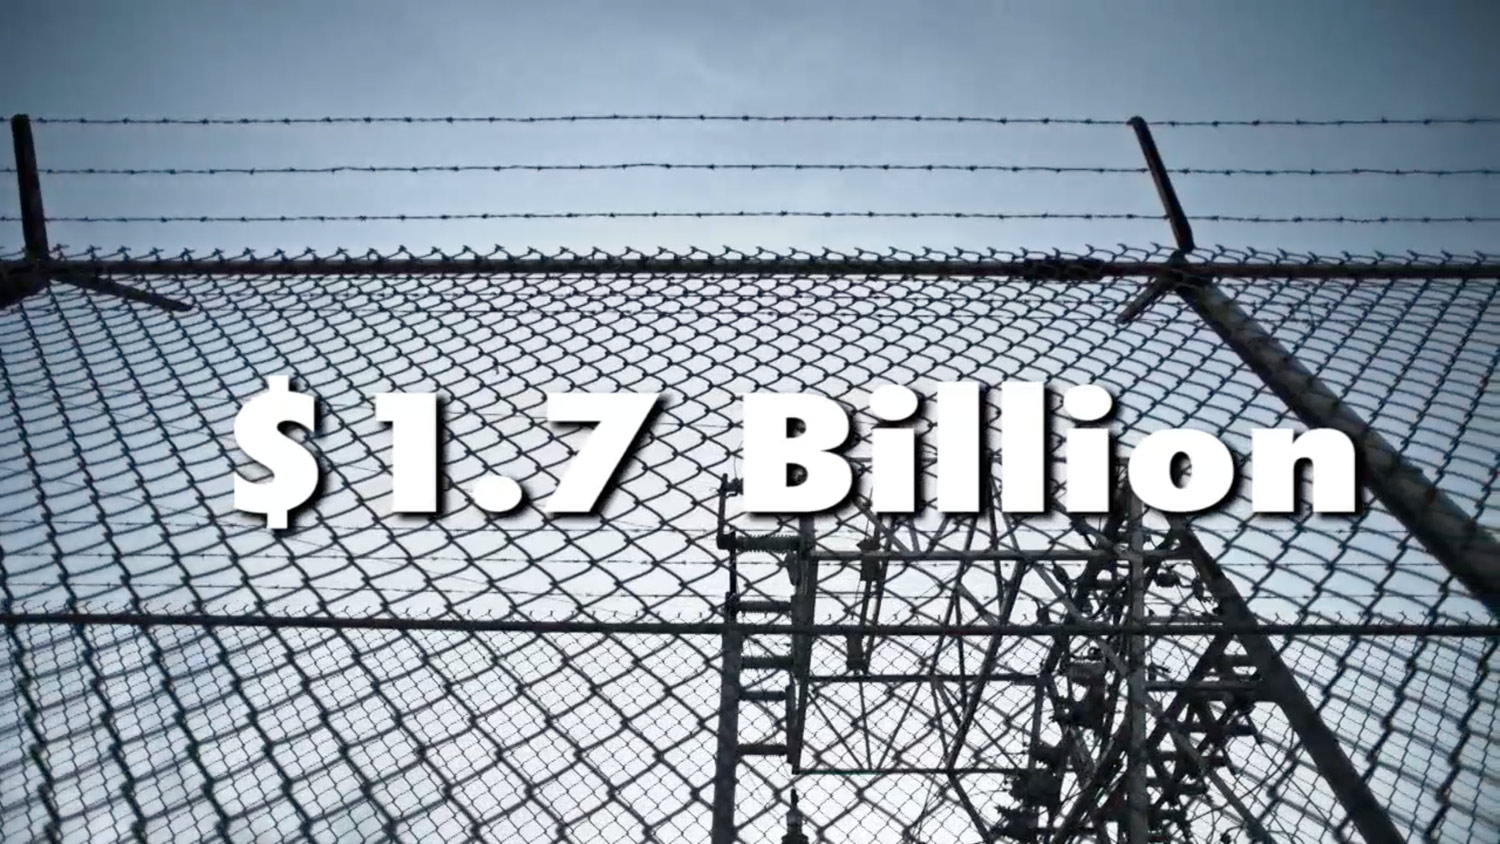 VIDEO: Why This Company Wants You in Prison